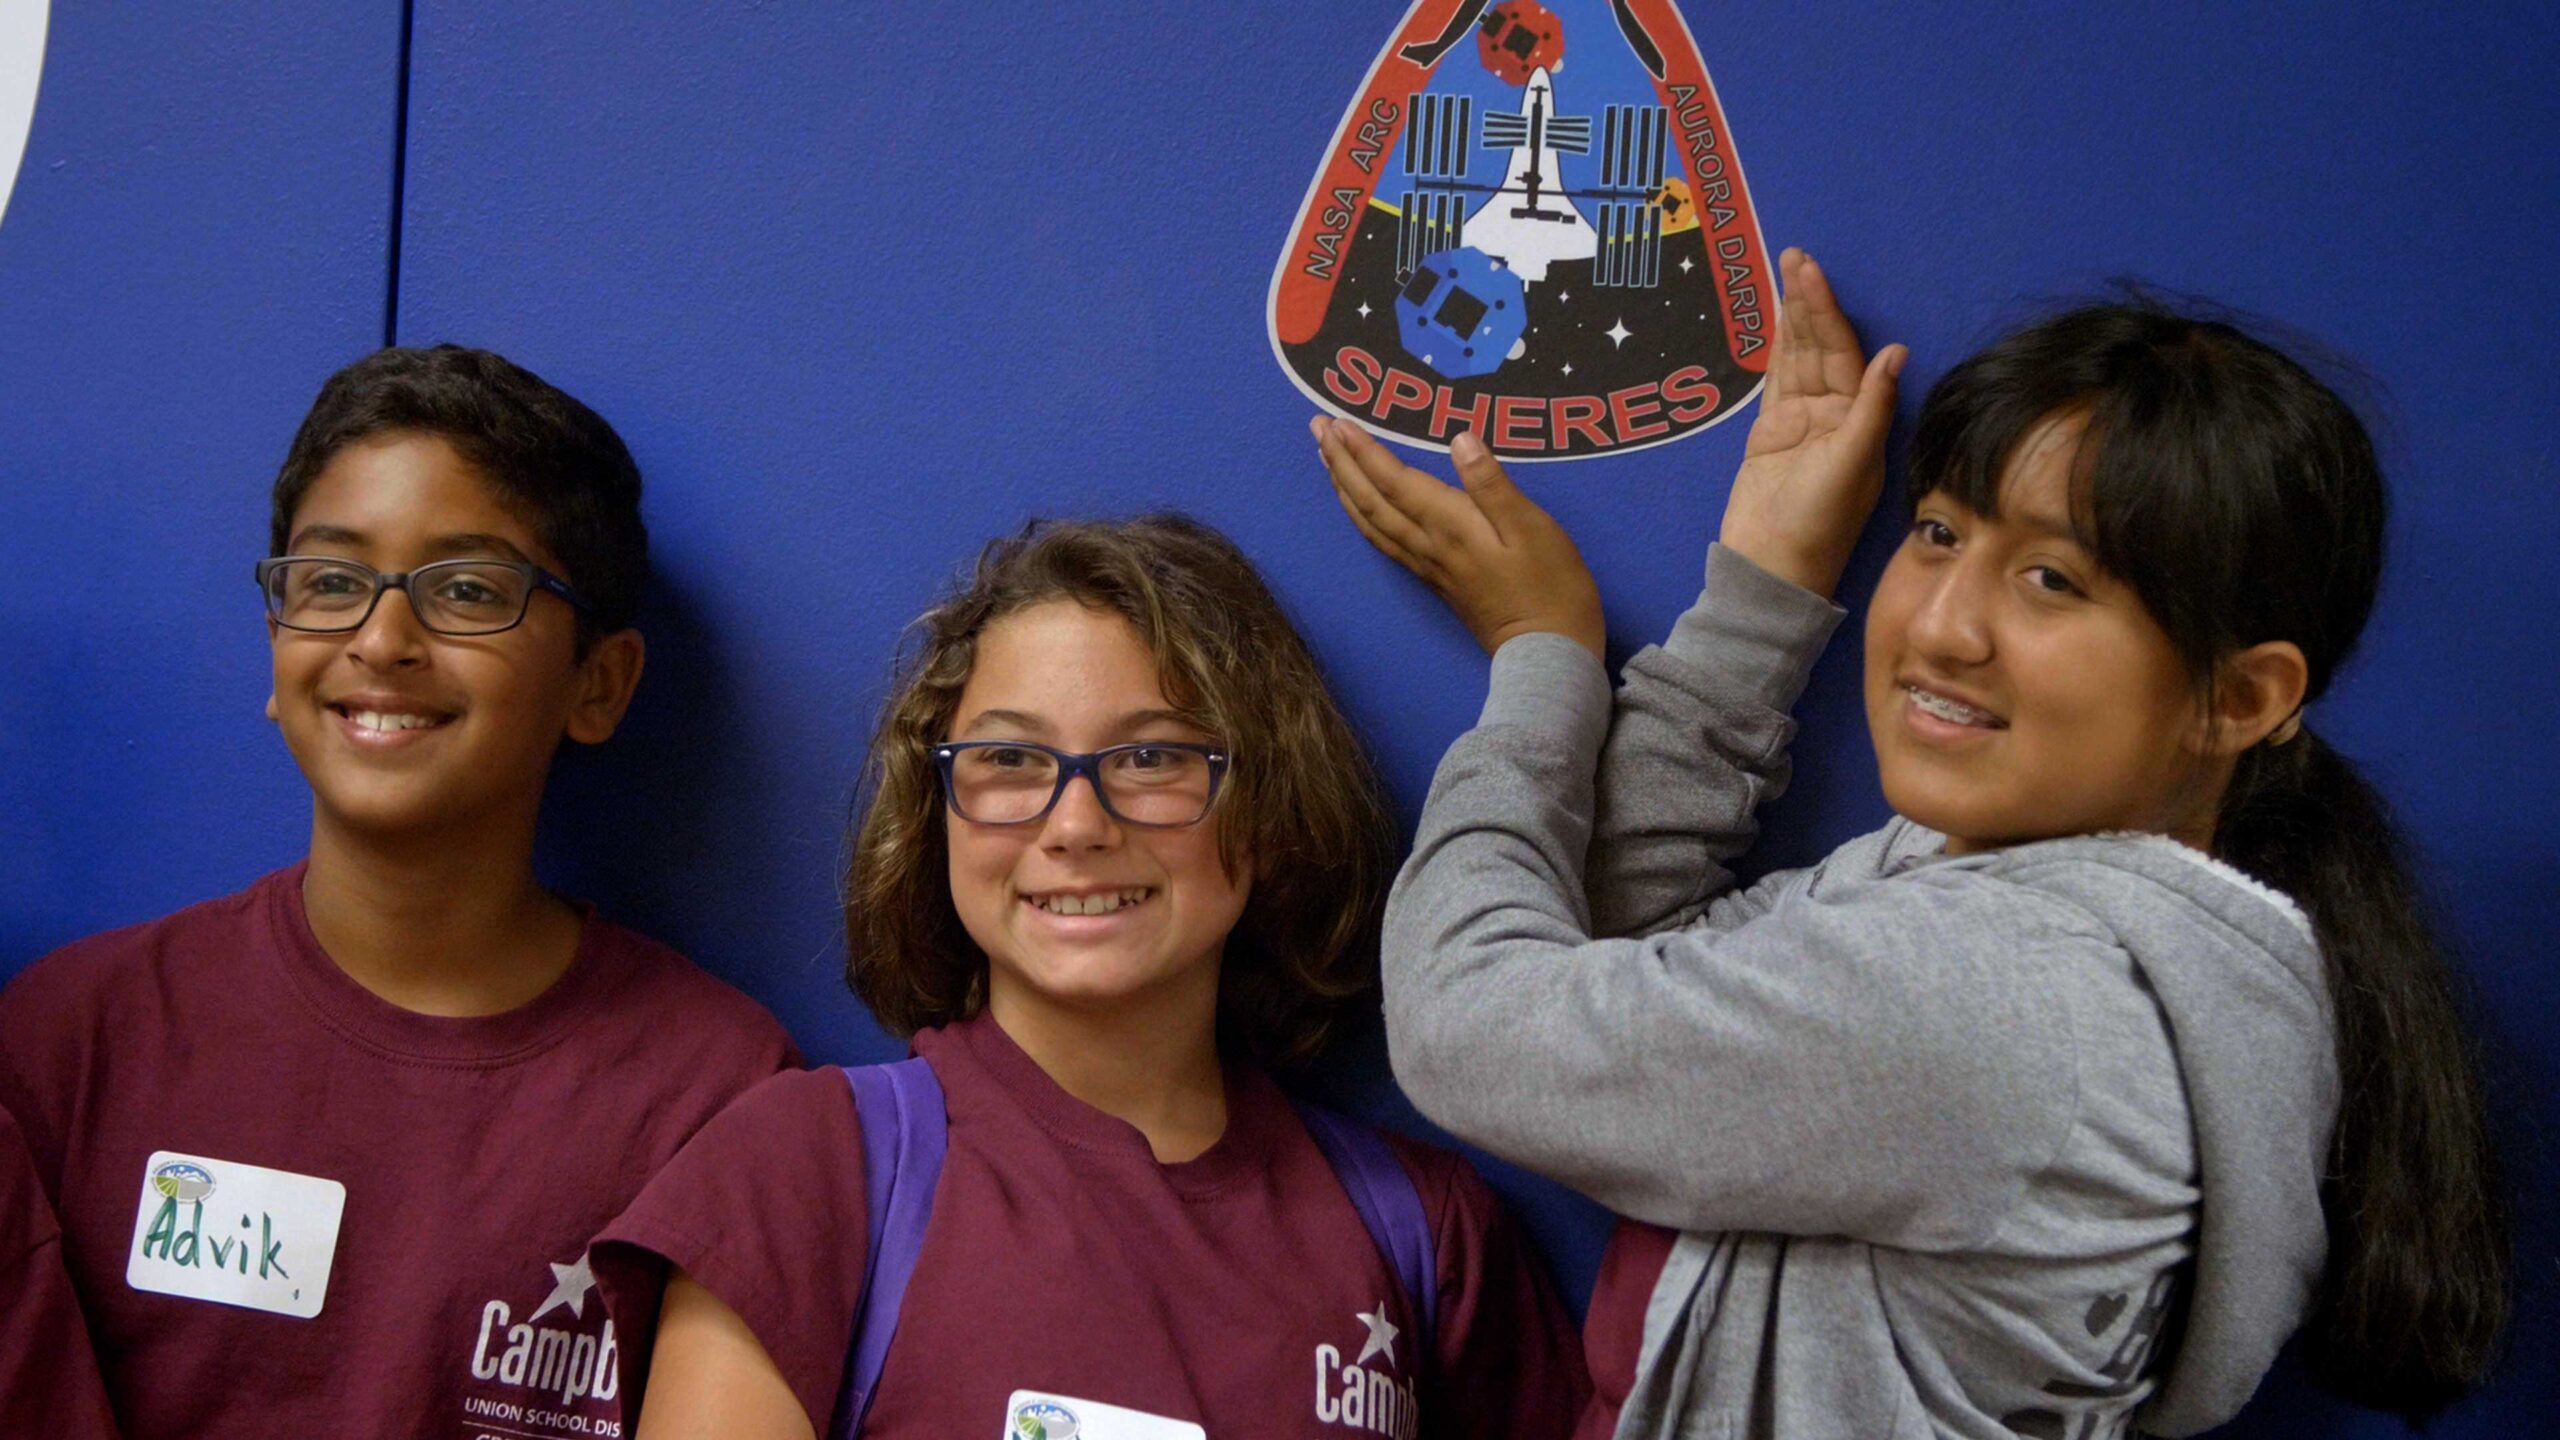 Mercury News: Campbell Students’ space shot featured in documentary